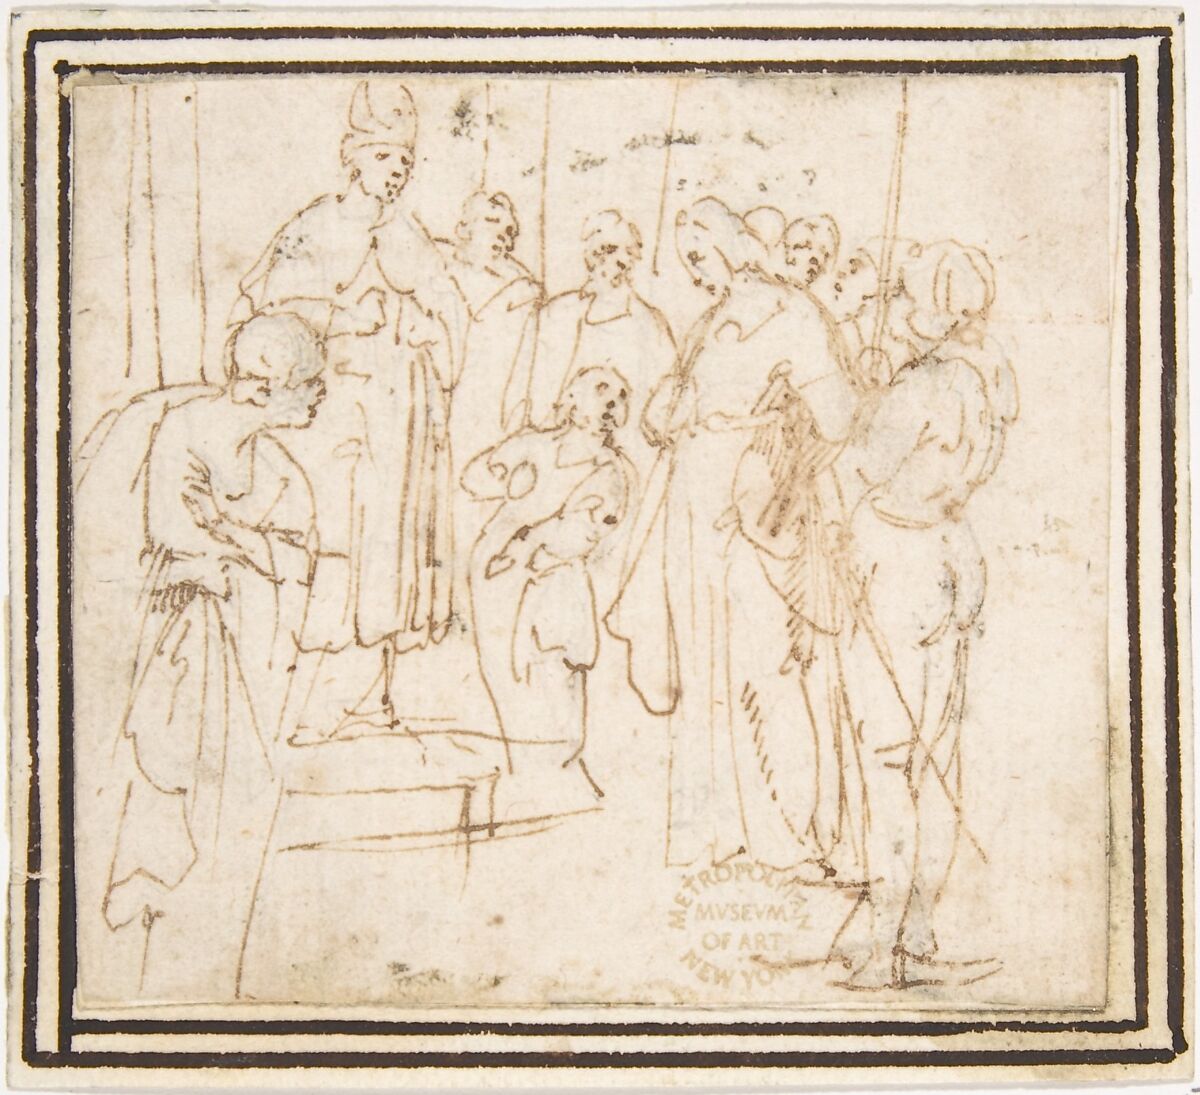 Christ before the High Priest Caiphas, attributed to Francesco Allegrini (Italian, Cantiano (?) 1615/20–after 1679 Gubbio (?)), Pen and brown ink.  Framing lines in pen and brown ink on mount 